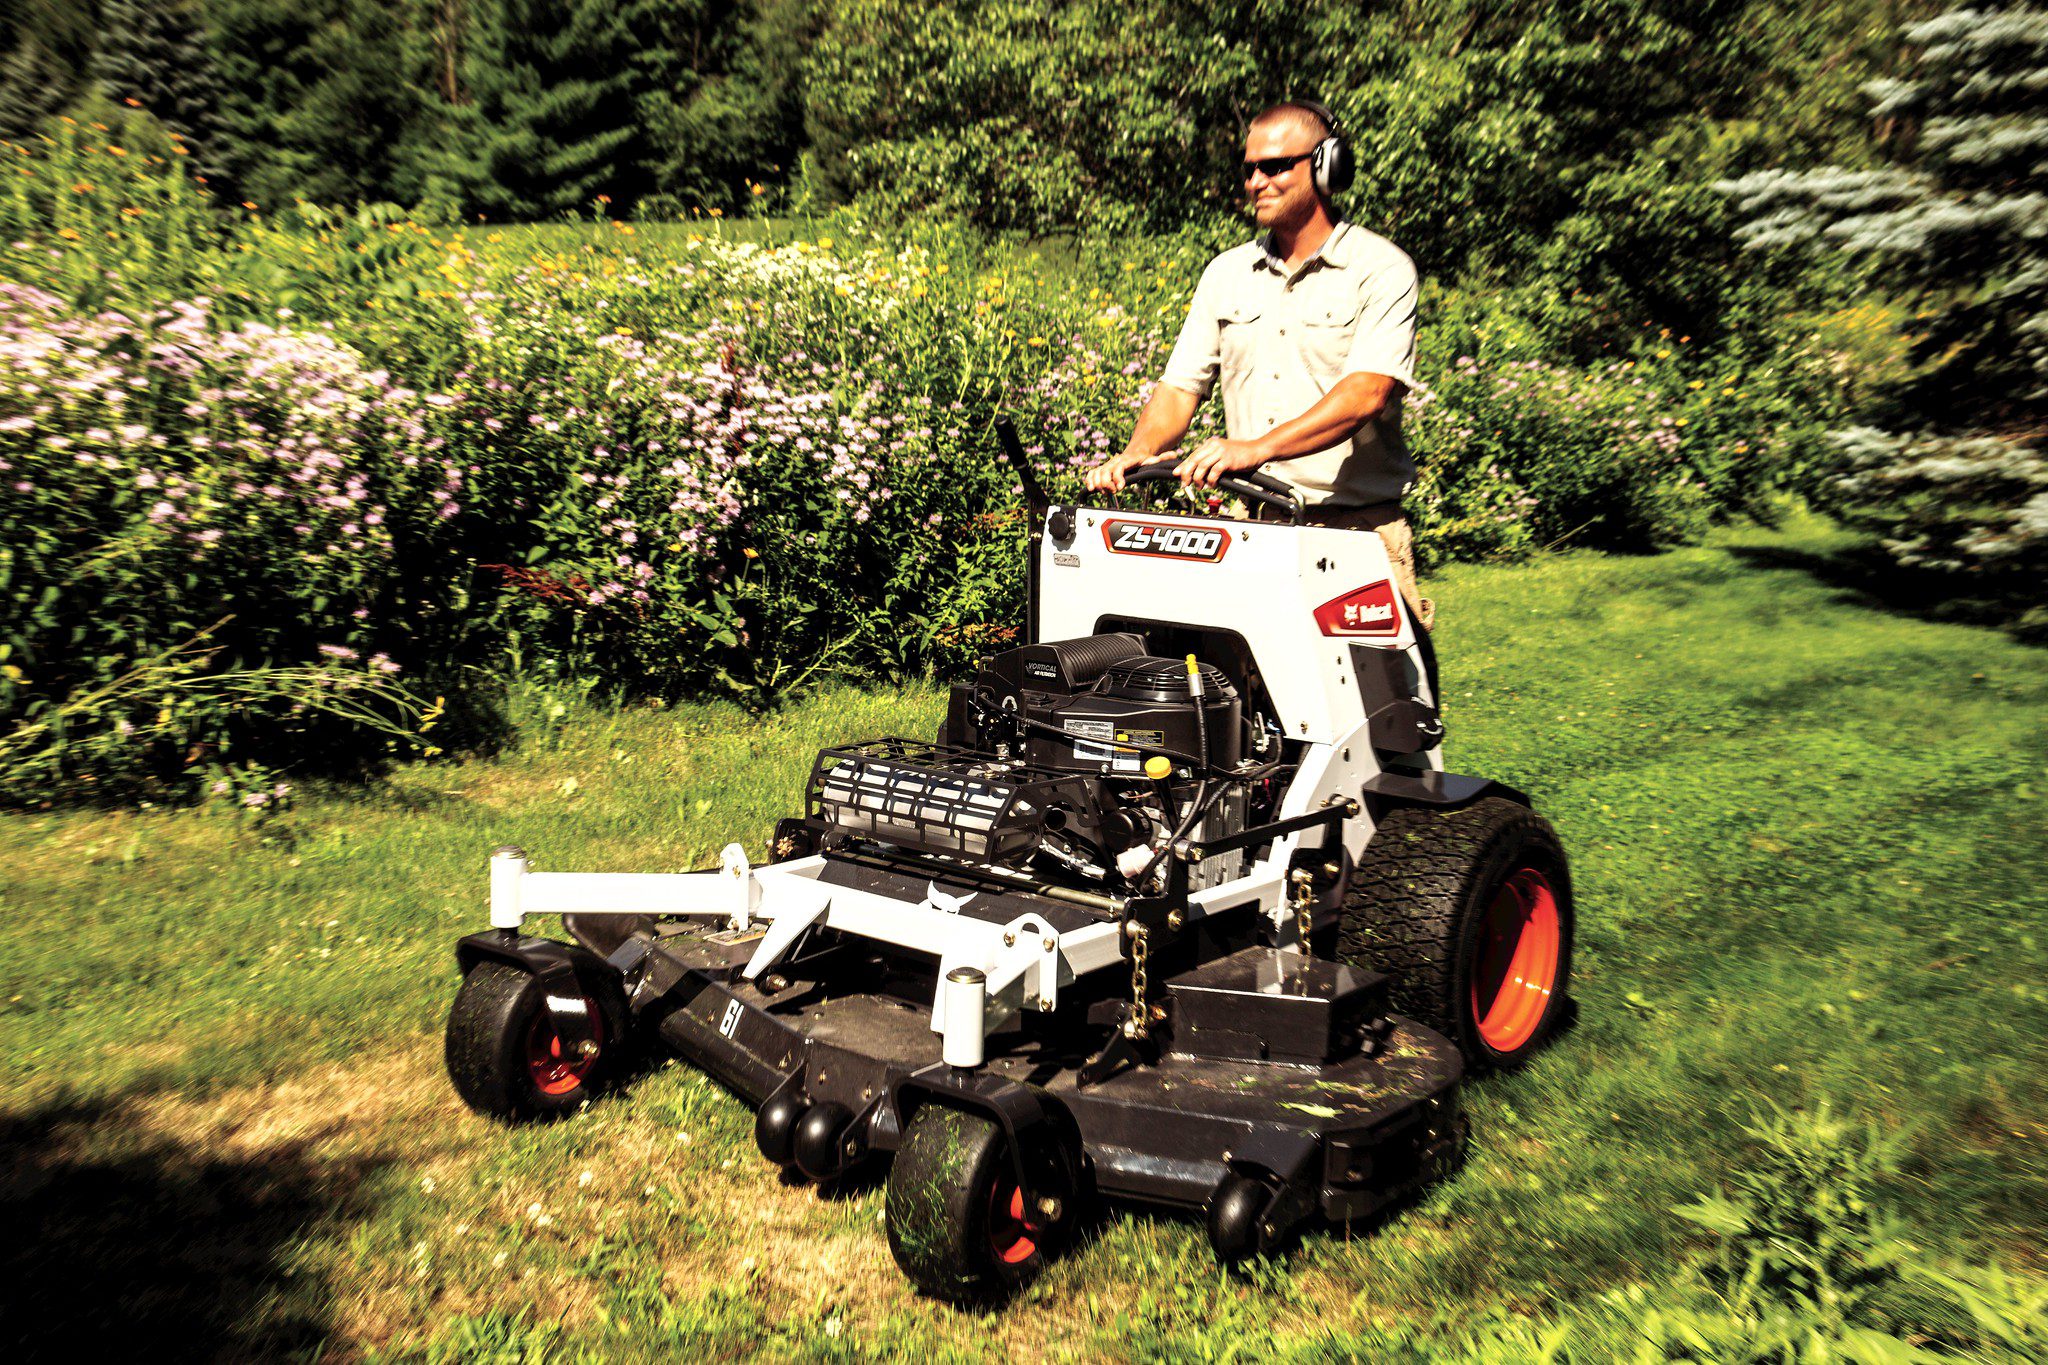 Browse Specs and more for the ZS4000 Stand-On Mower 48″ - Bobcat of the Rockies